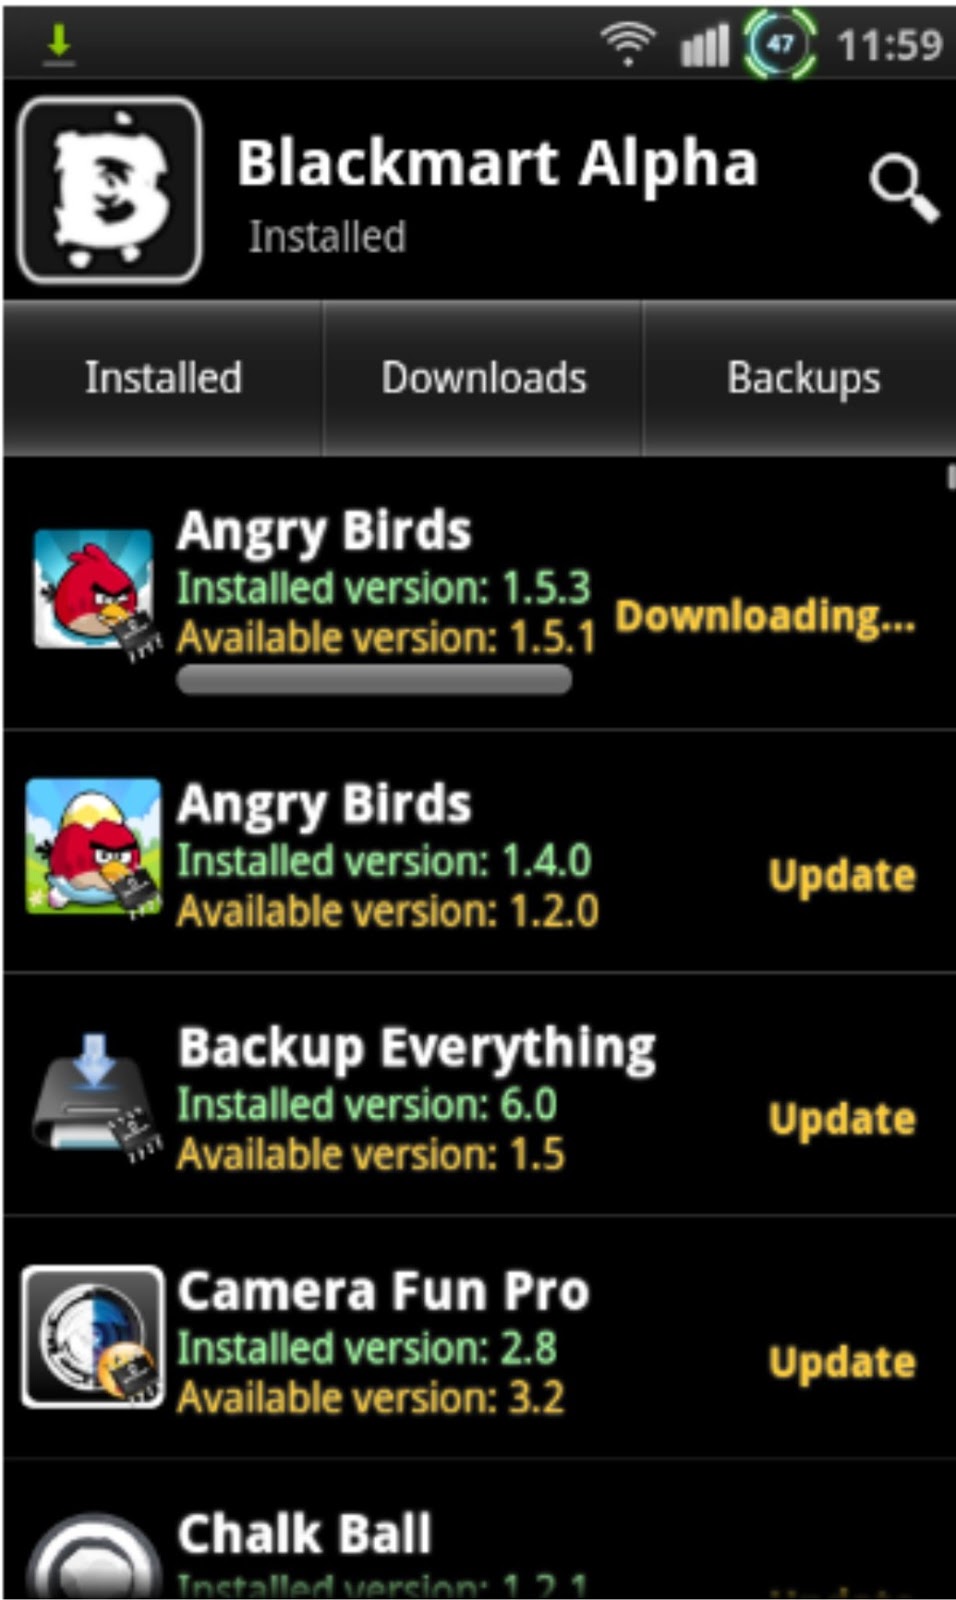 Download Blackmart Alpha For Android 4.0